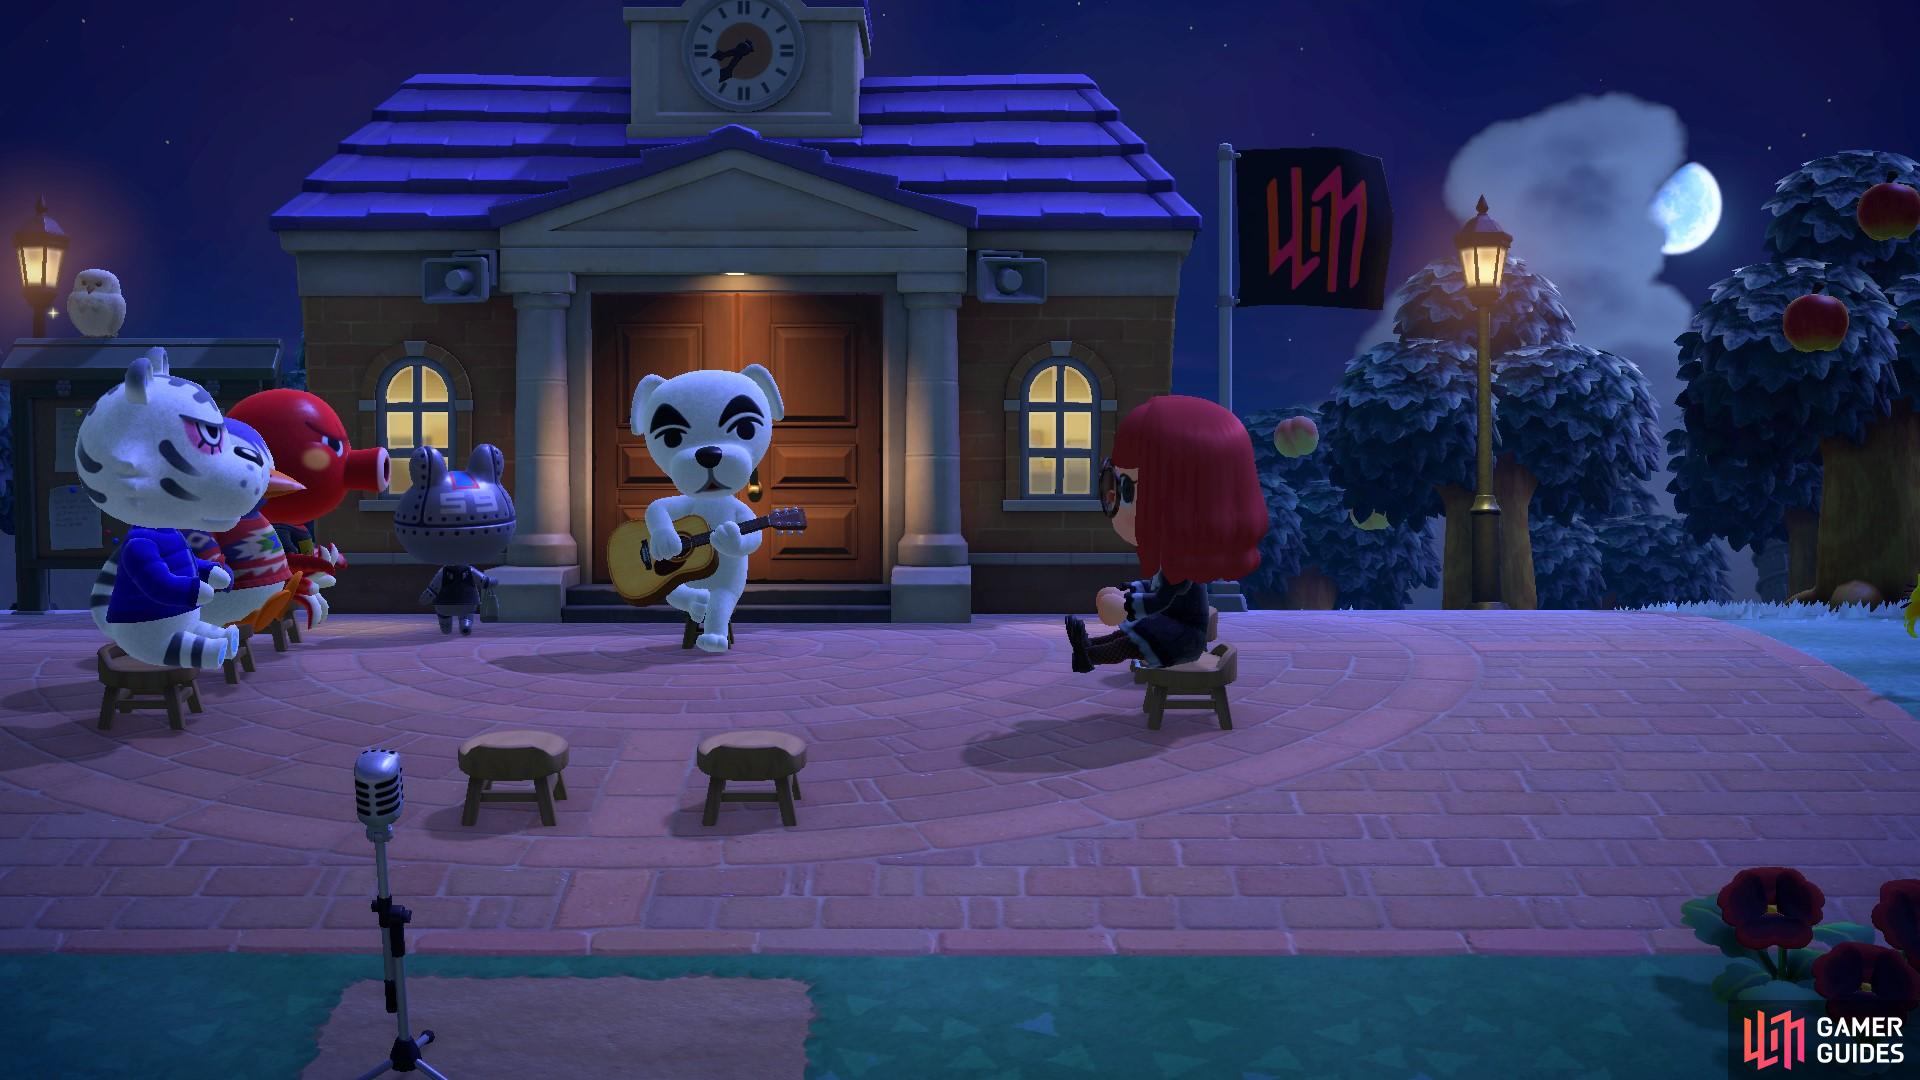 Throughout the day, your villagers will sit and have a listen to K.K.'s tunes.